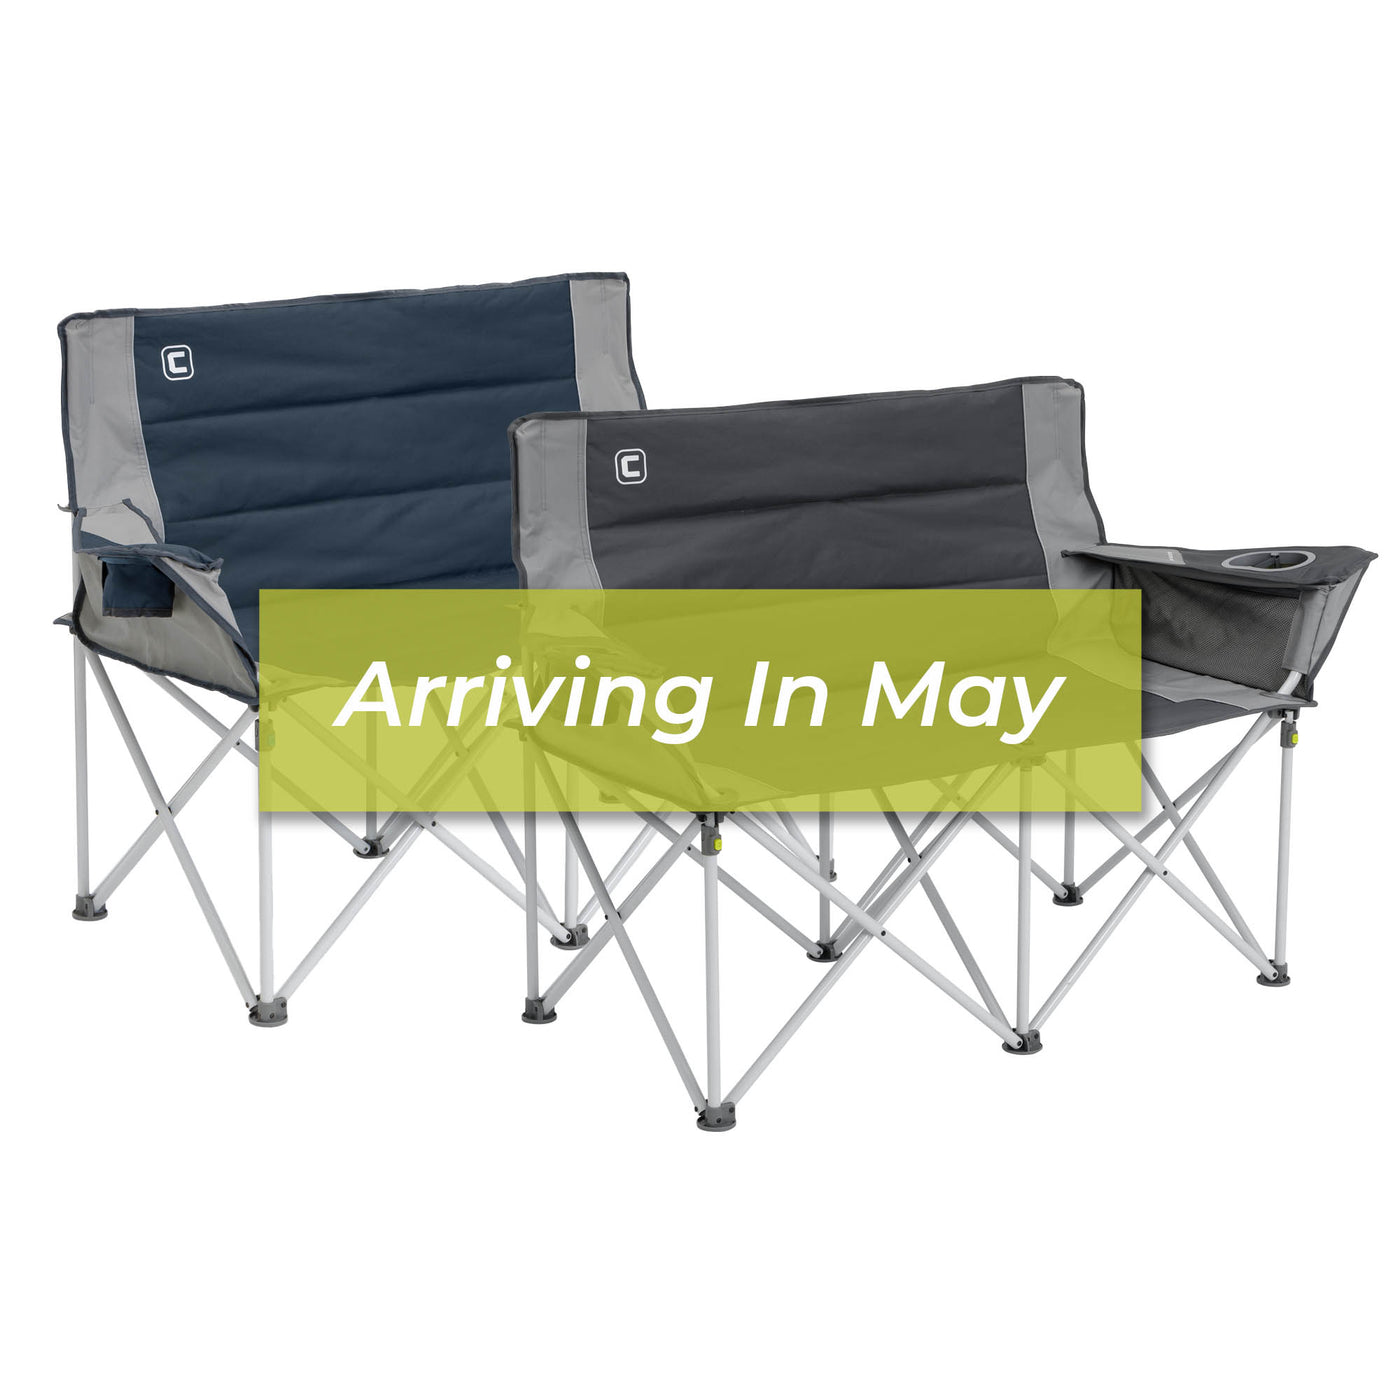 Loveseat Double Outdoor Camp Chair